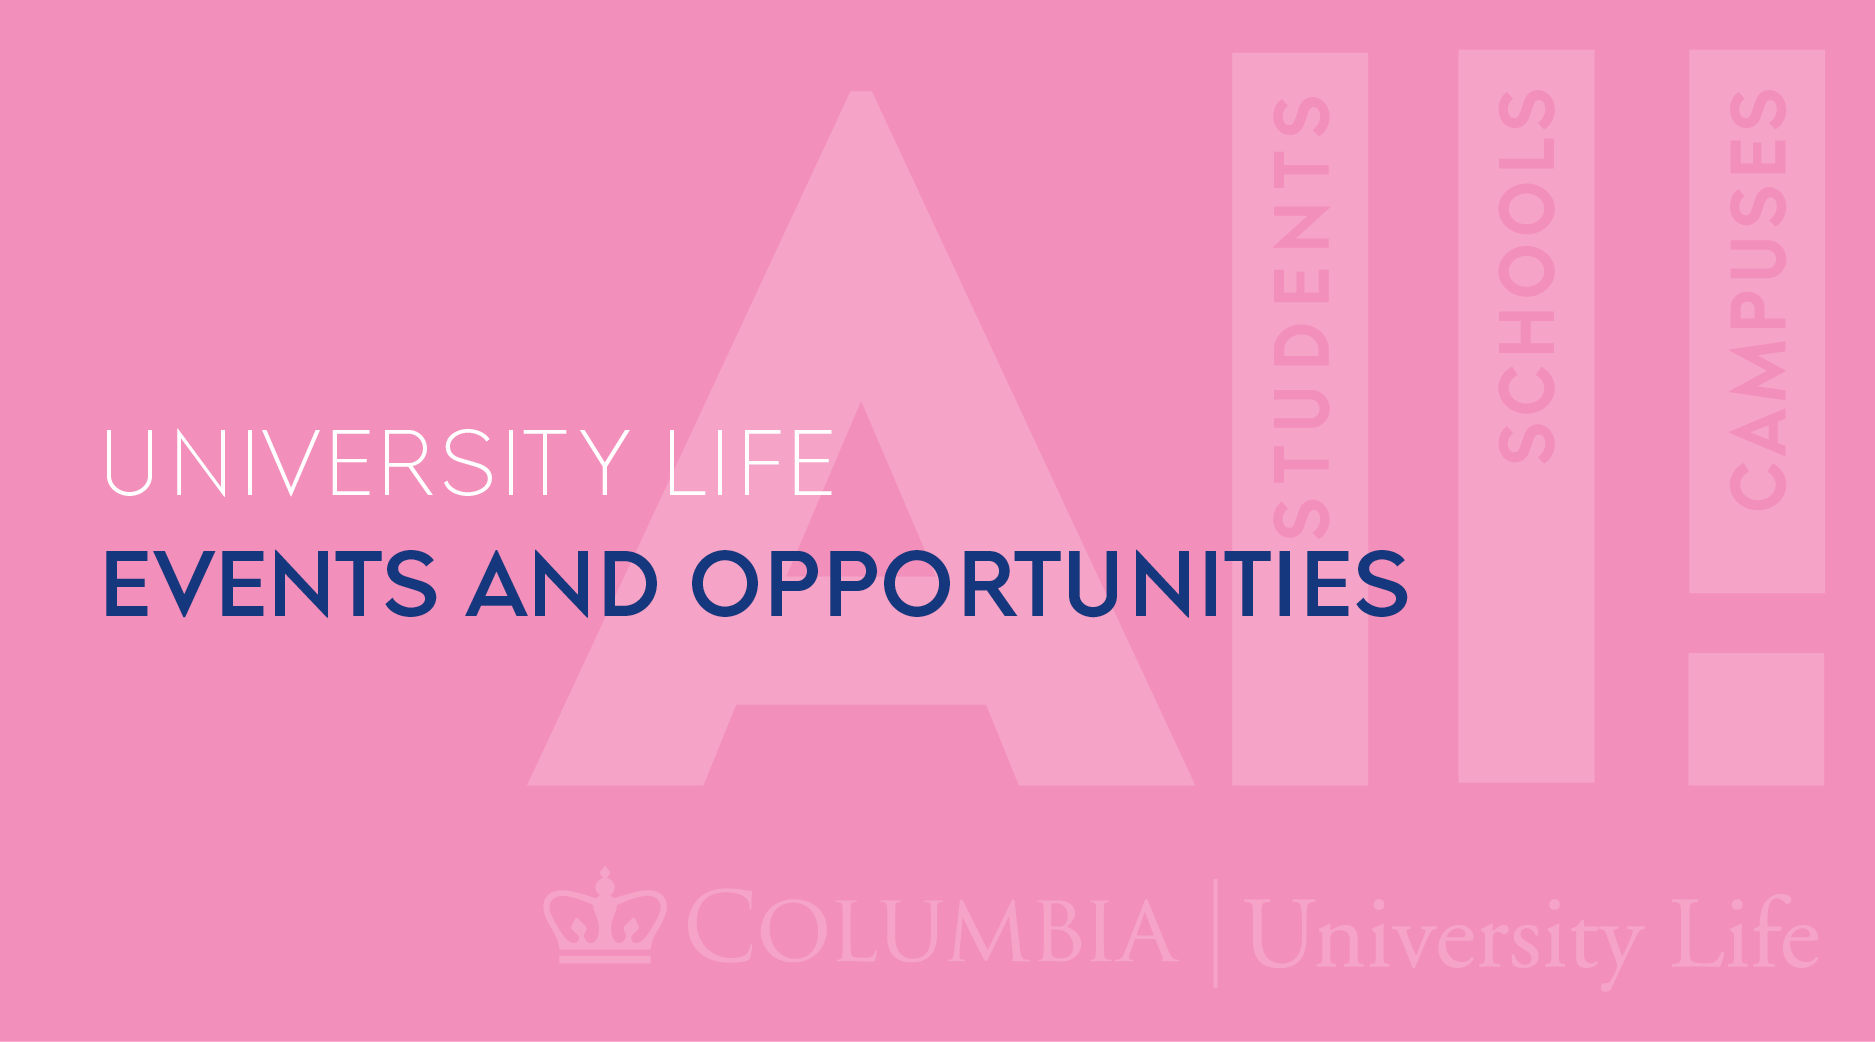 translucent University Life logo laid over a pink background with the text "University Life Events and Opportunities"